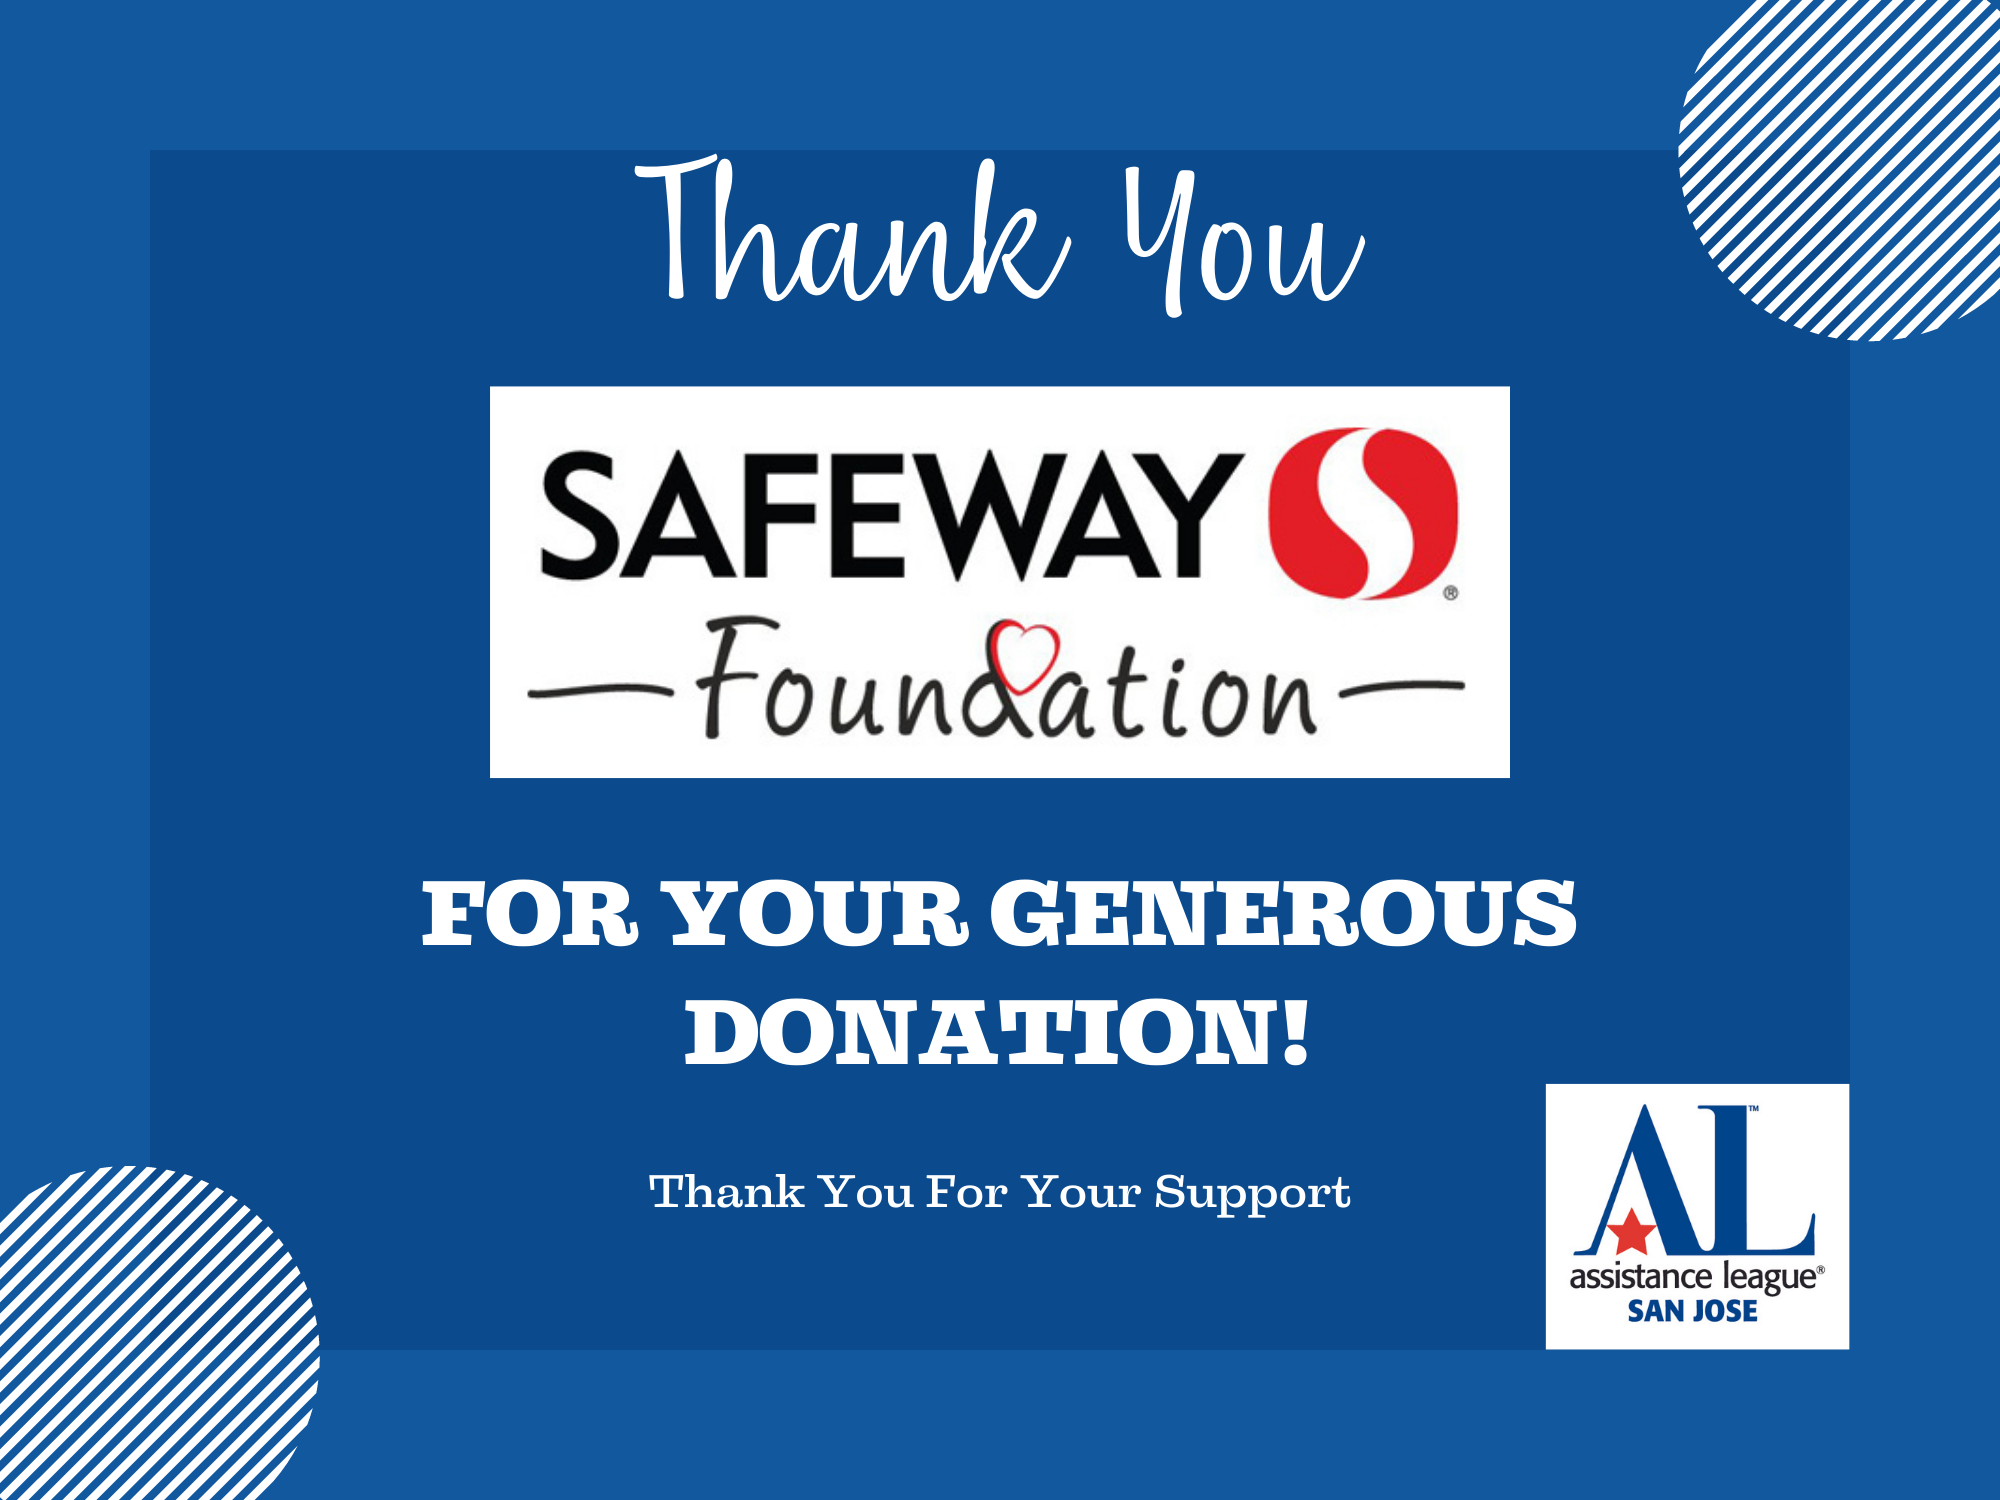 Thank You Safeway Foundation for your generous donation!